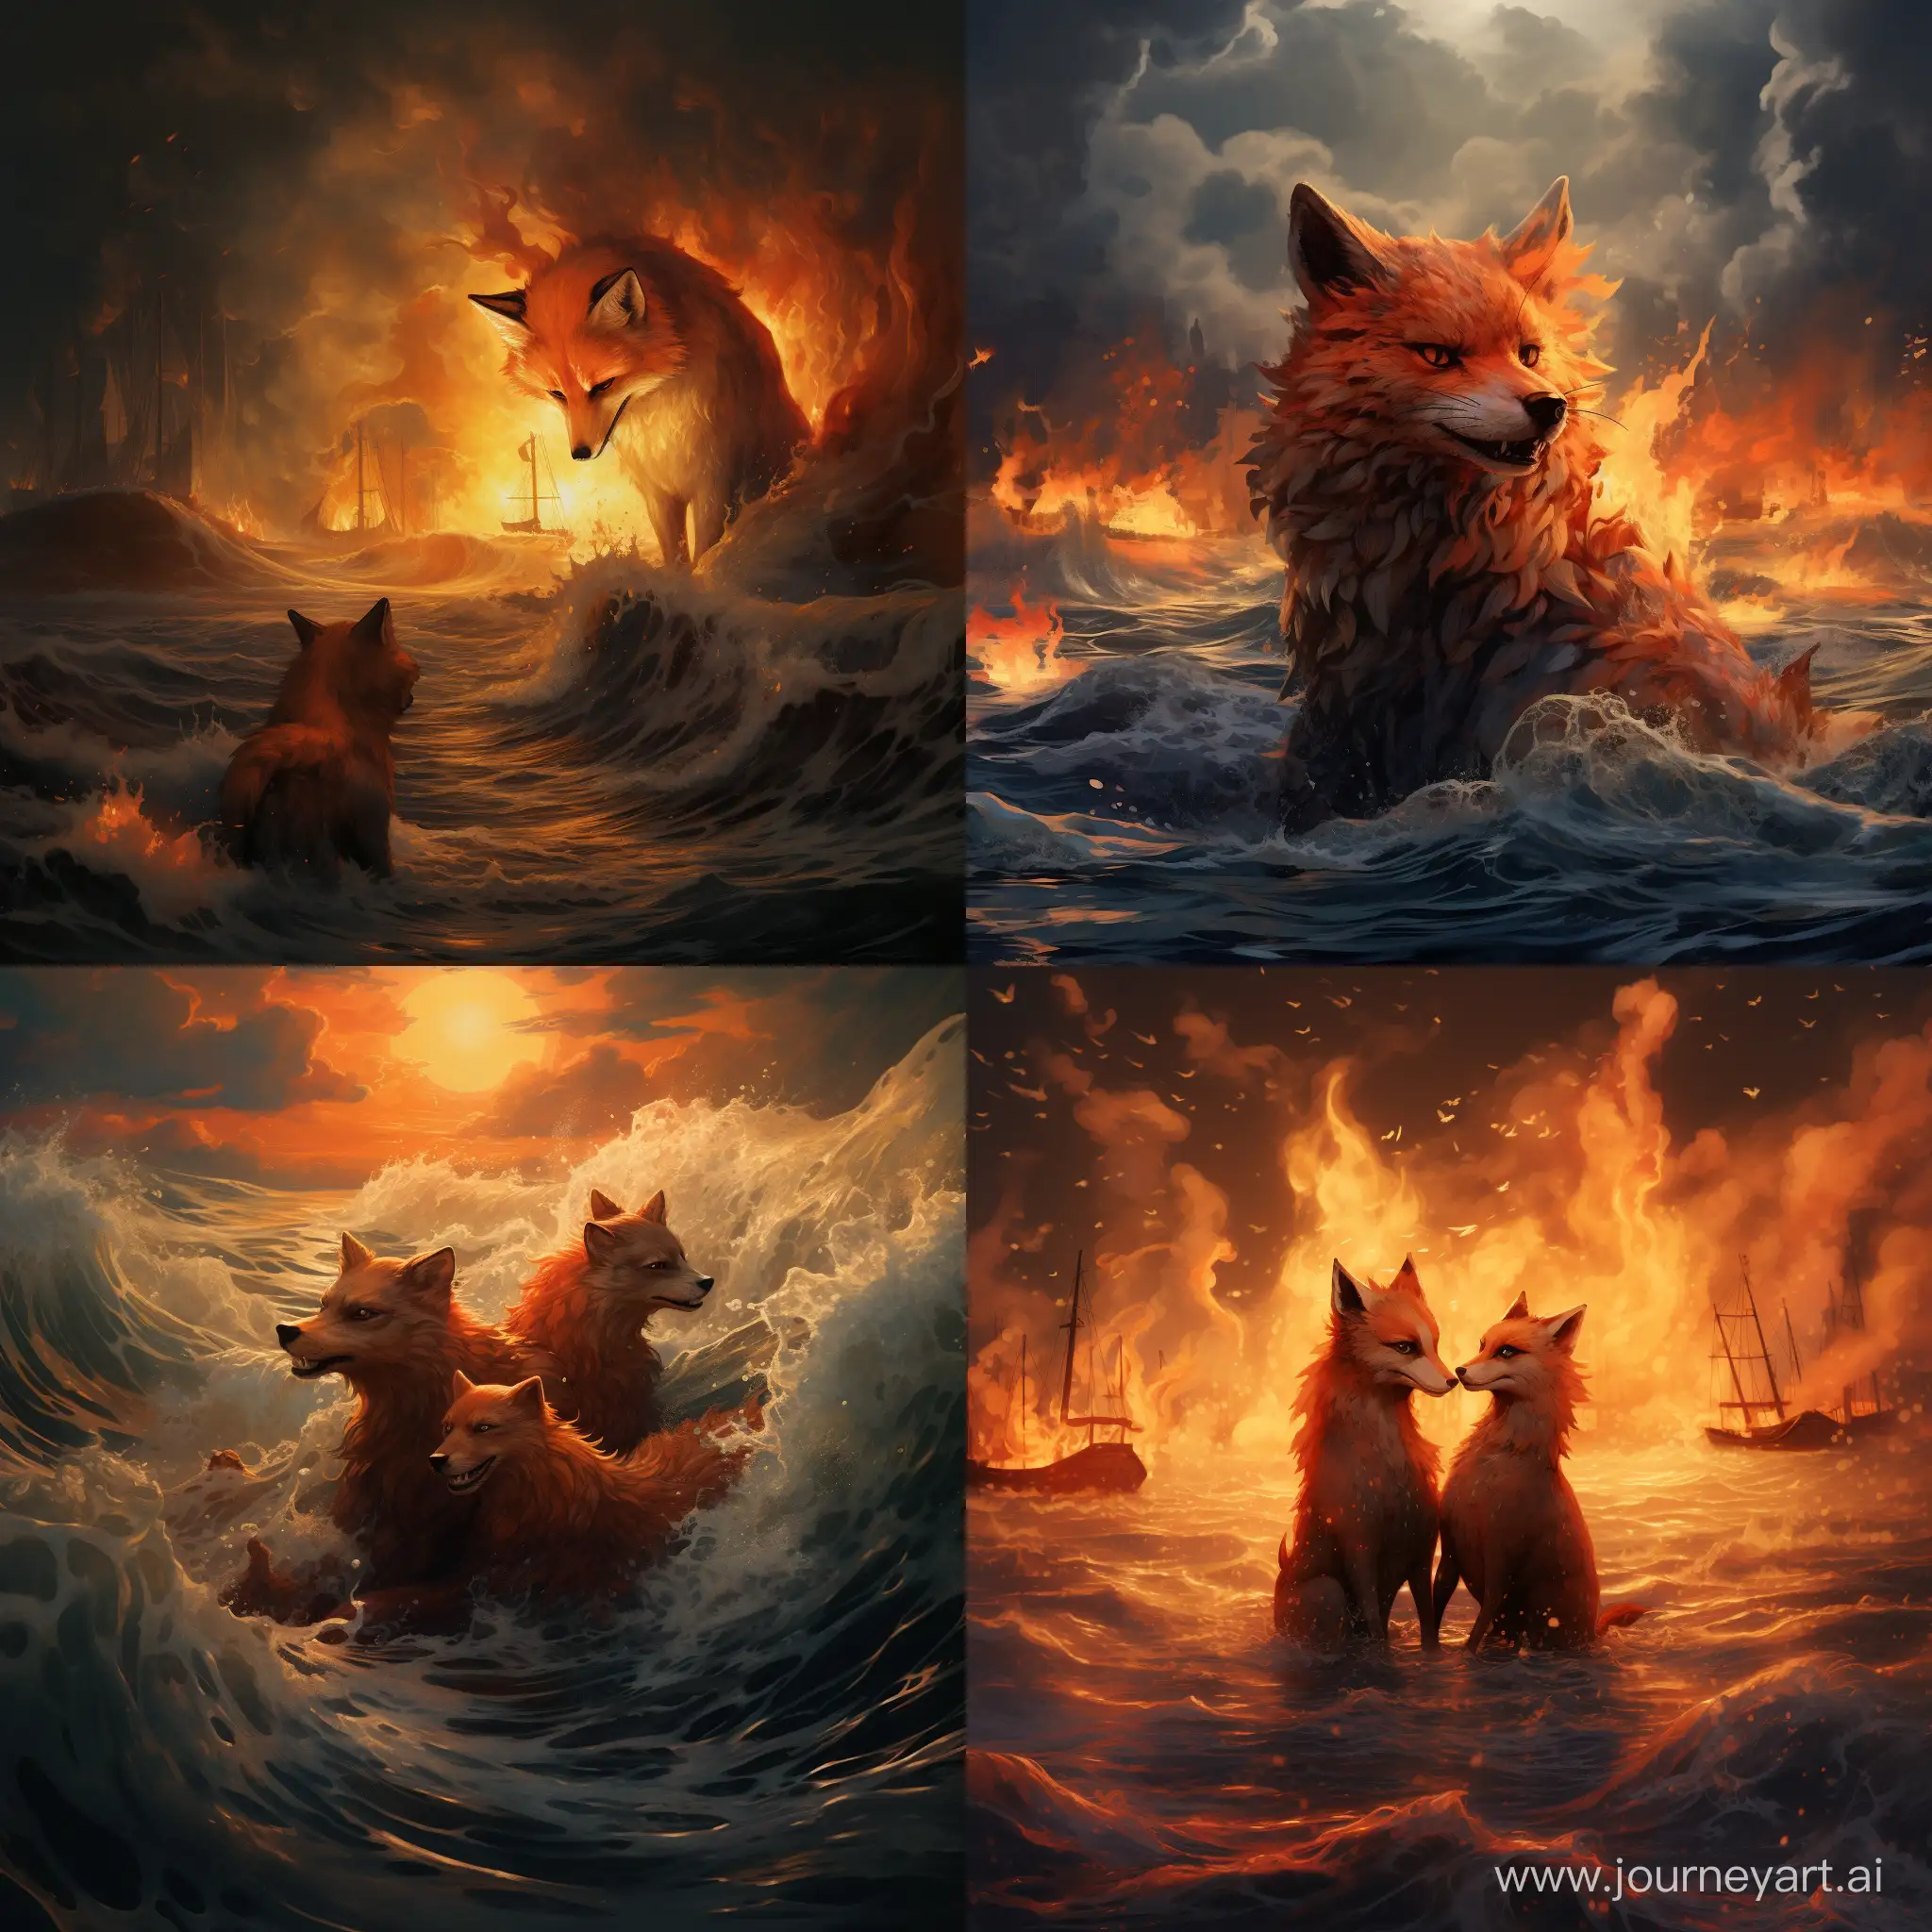 Foxes-Igniting-the-Sea-in-a-Stunning-Artistic-Composition